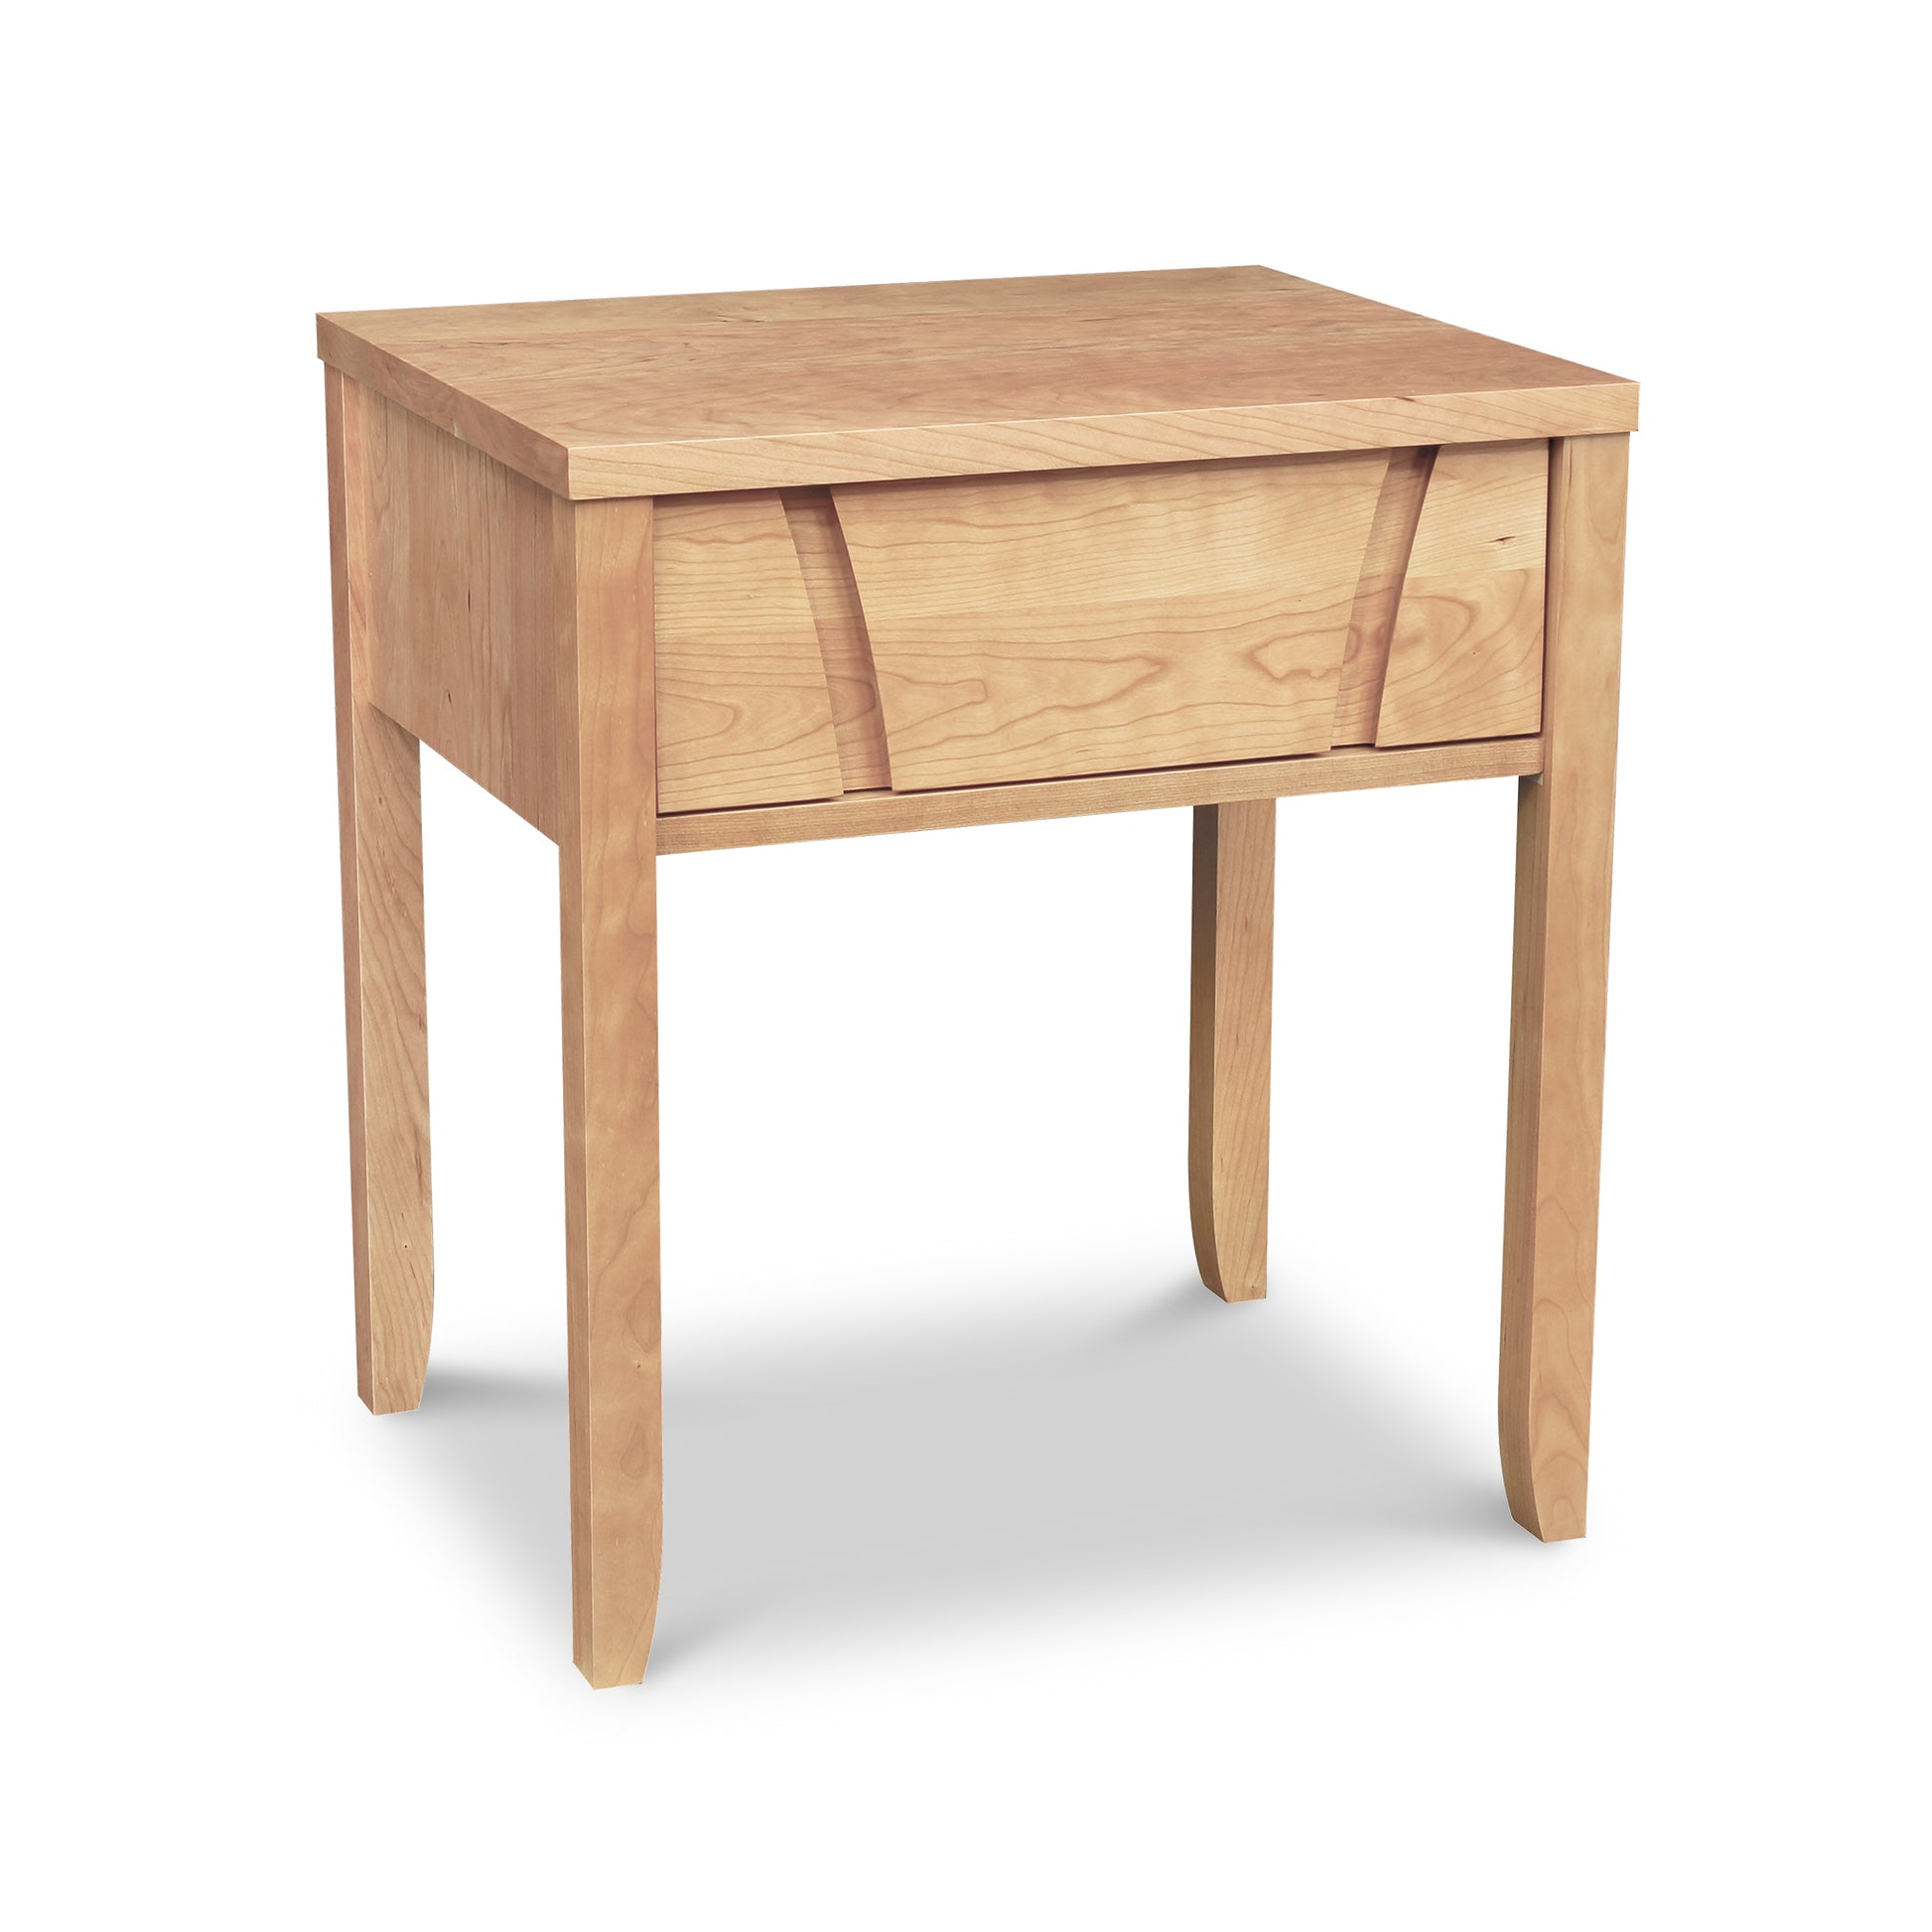 A unique Lyndon Furniture hardwood Holland 1-Drawer Nightstand with a drawer on top, featuring a curved finger pull design.